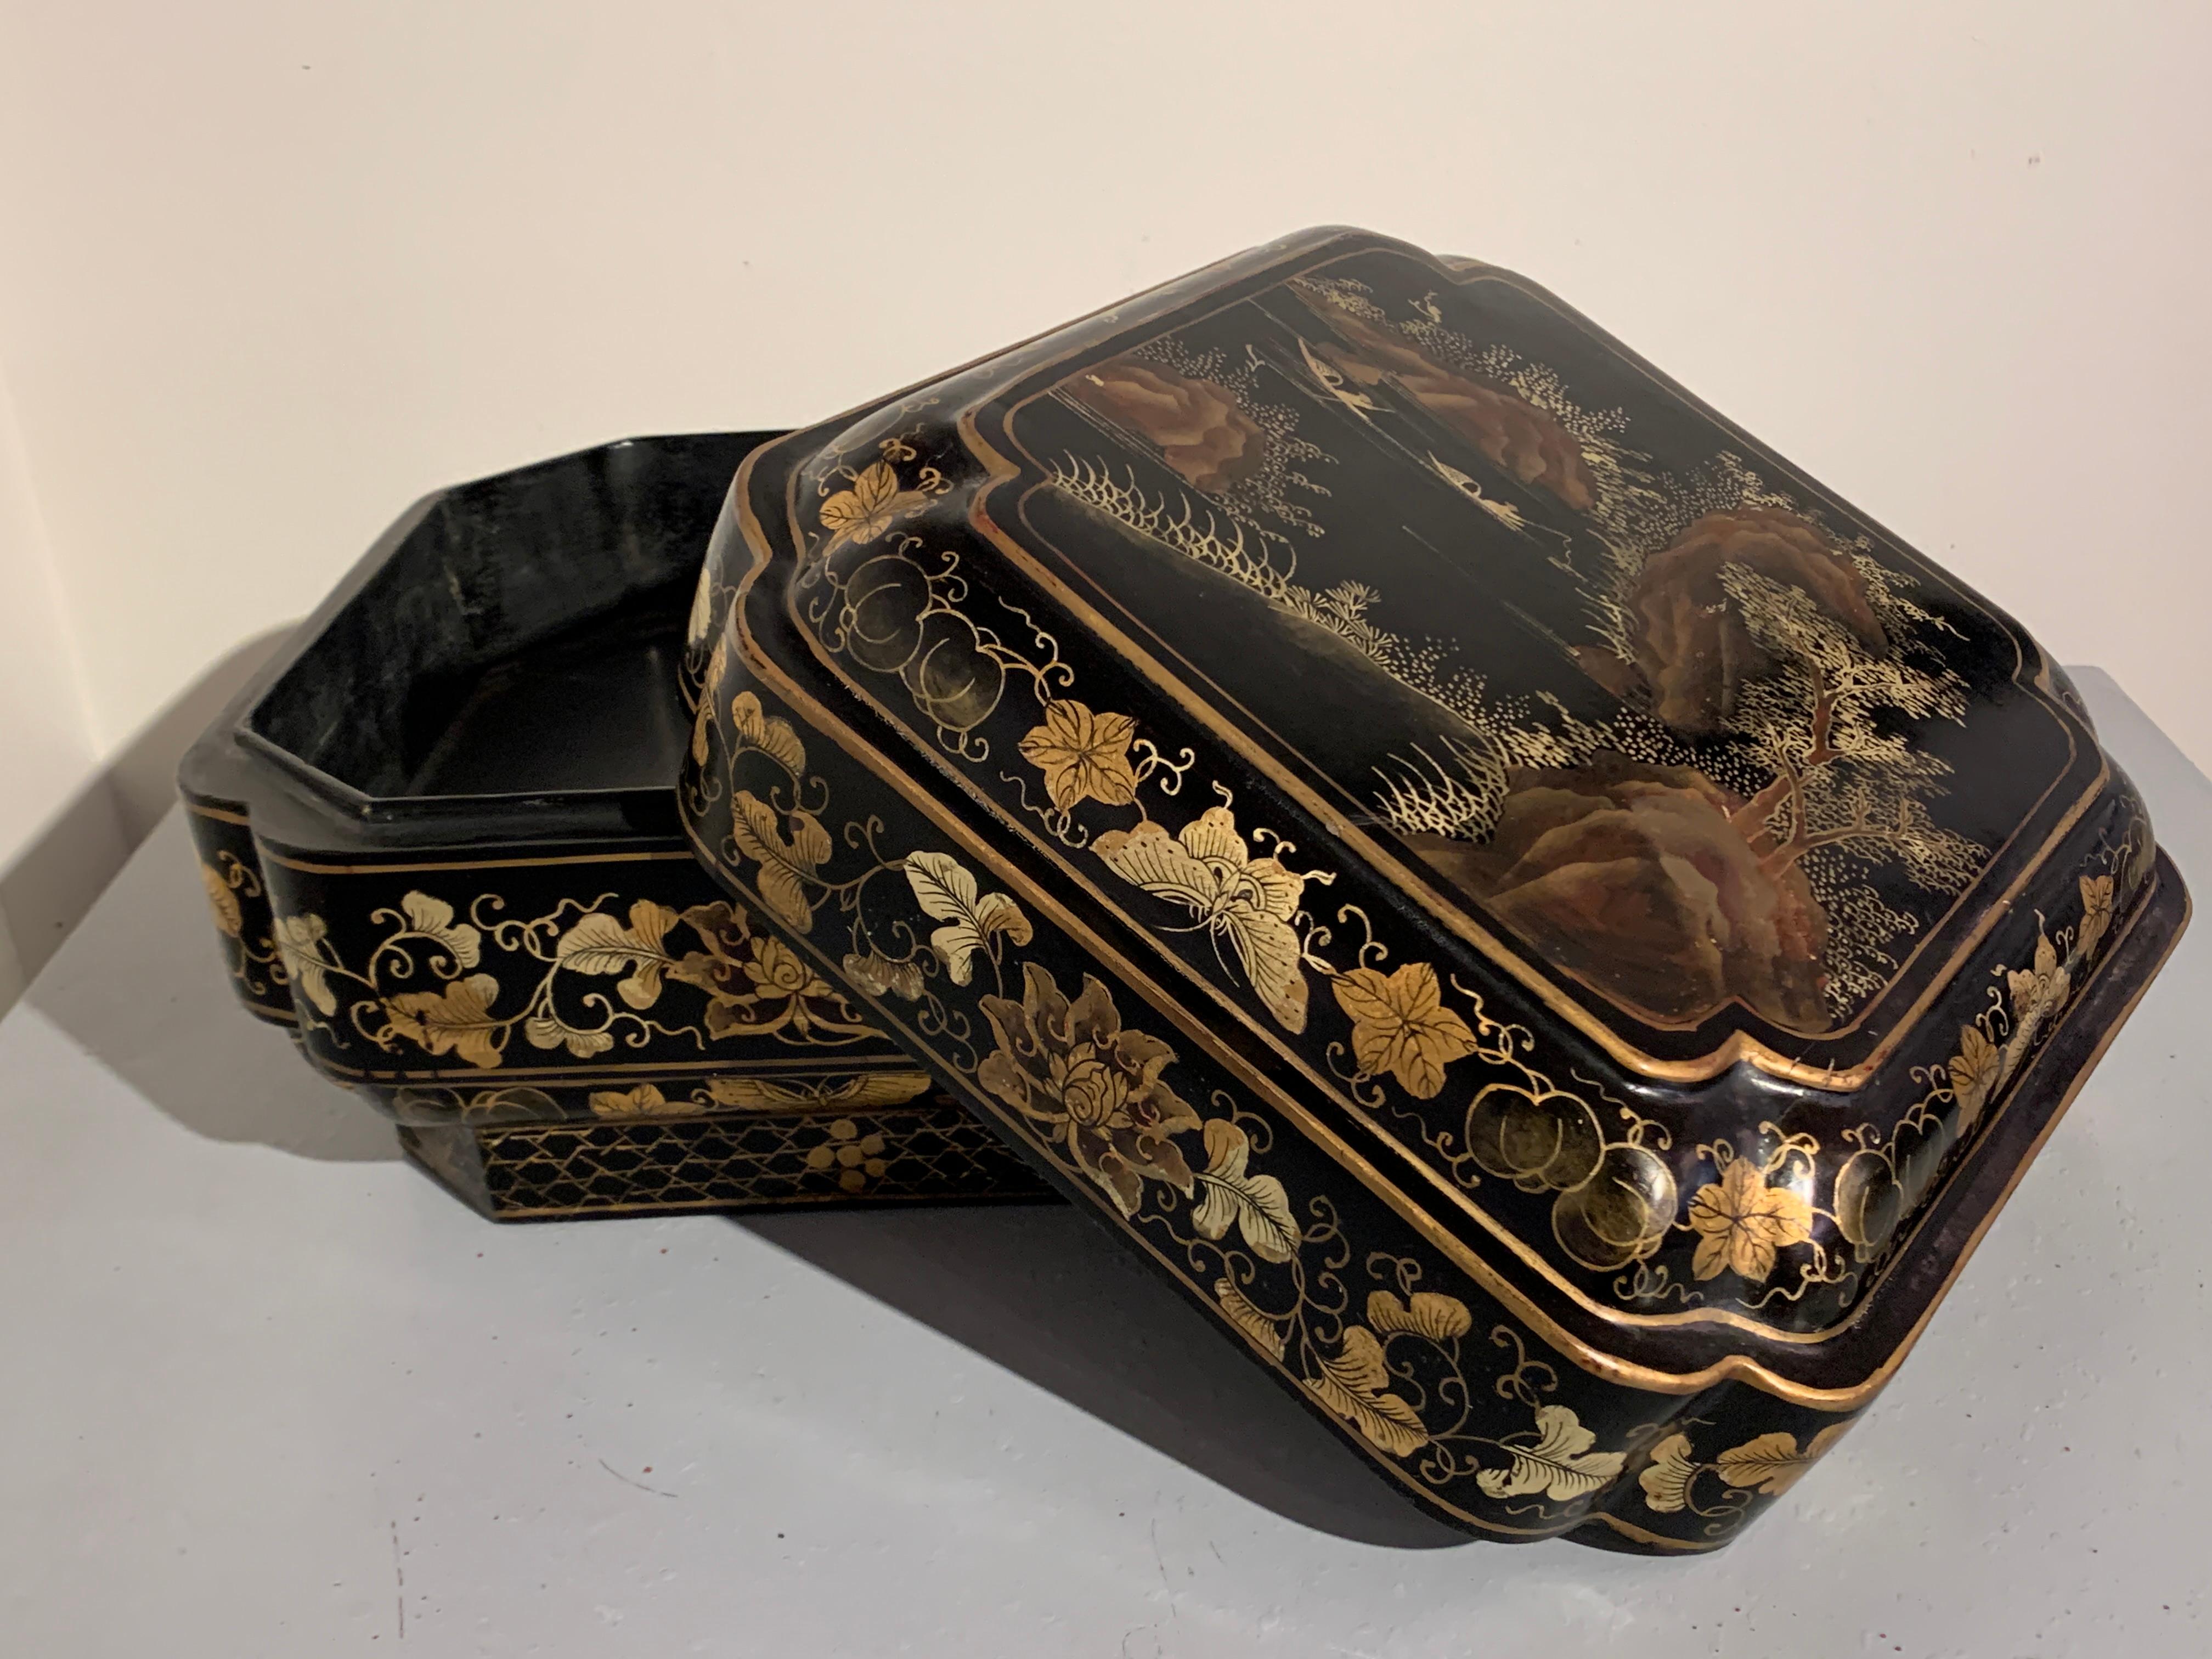 A large and highly decorative Chinese black lacquered wooden box with gilt painted decoration, mid 20th century, China. 

The large box of square quatrefoil form, may originally have been used as a gift box, and filled with food, silks, or other